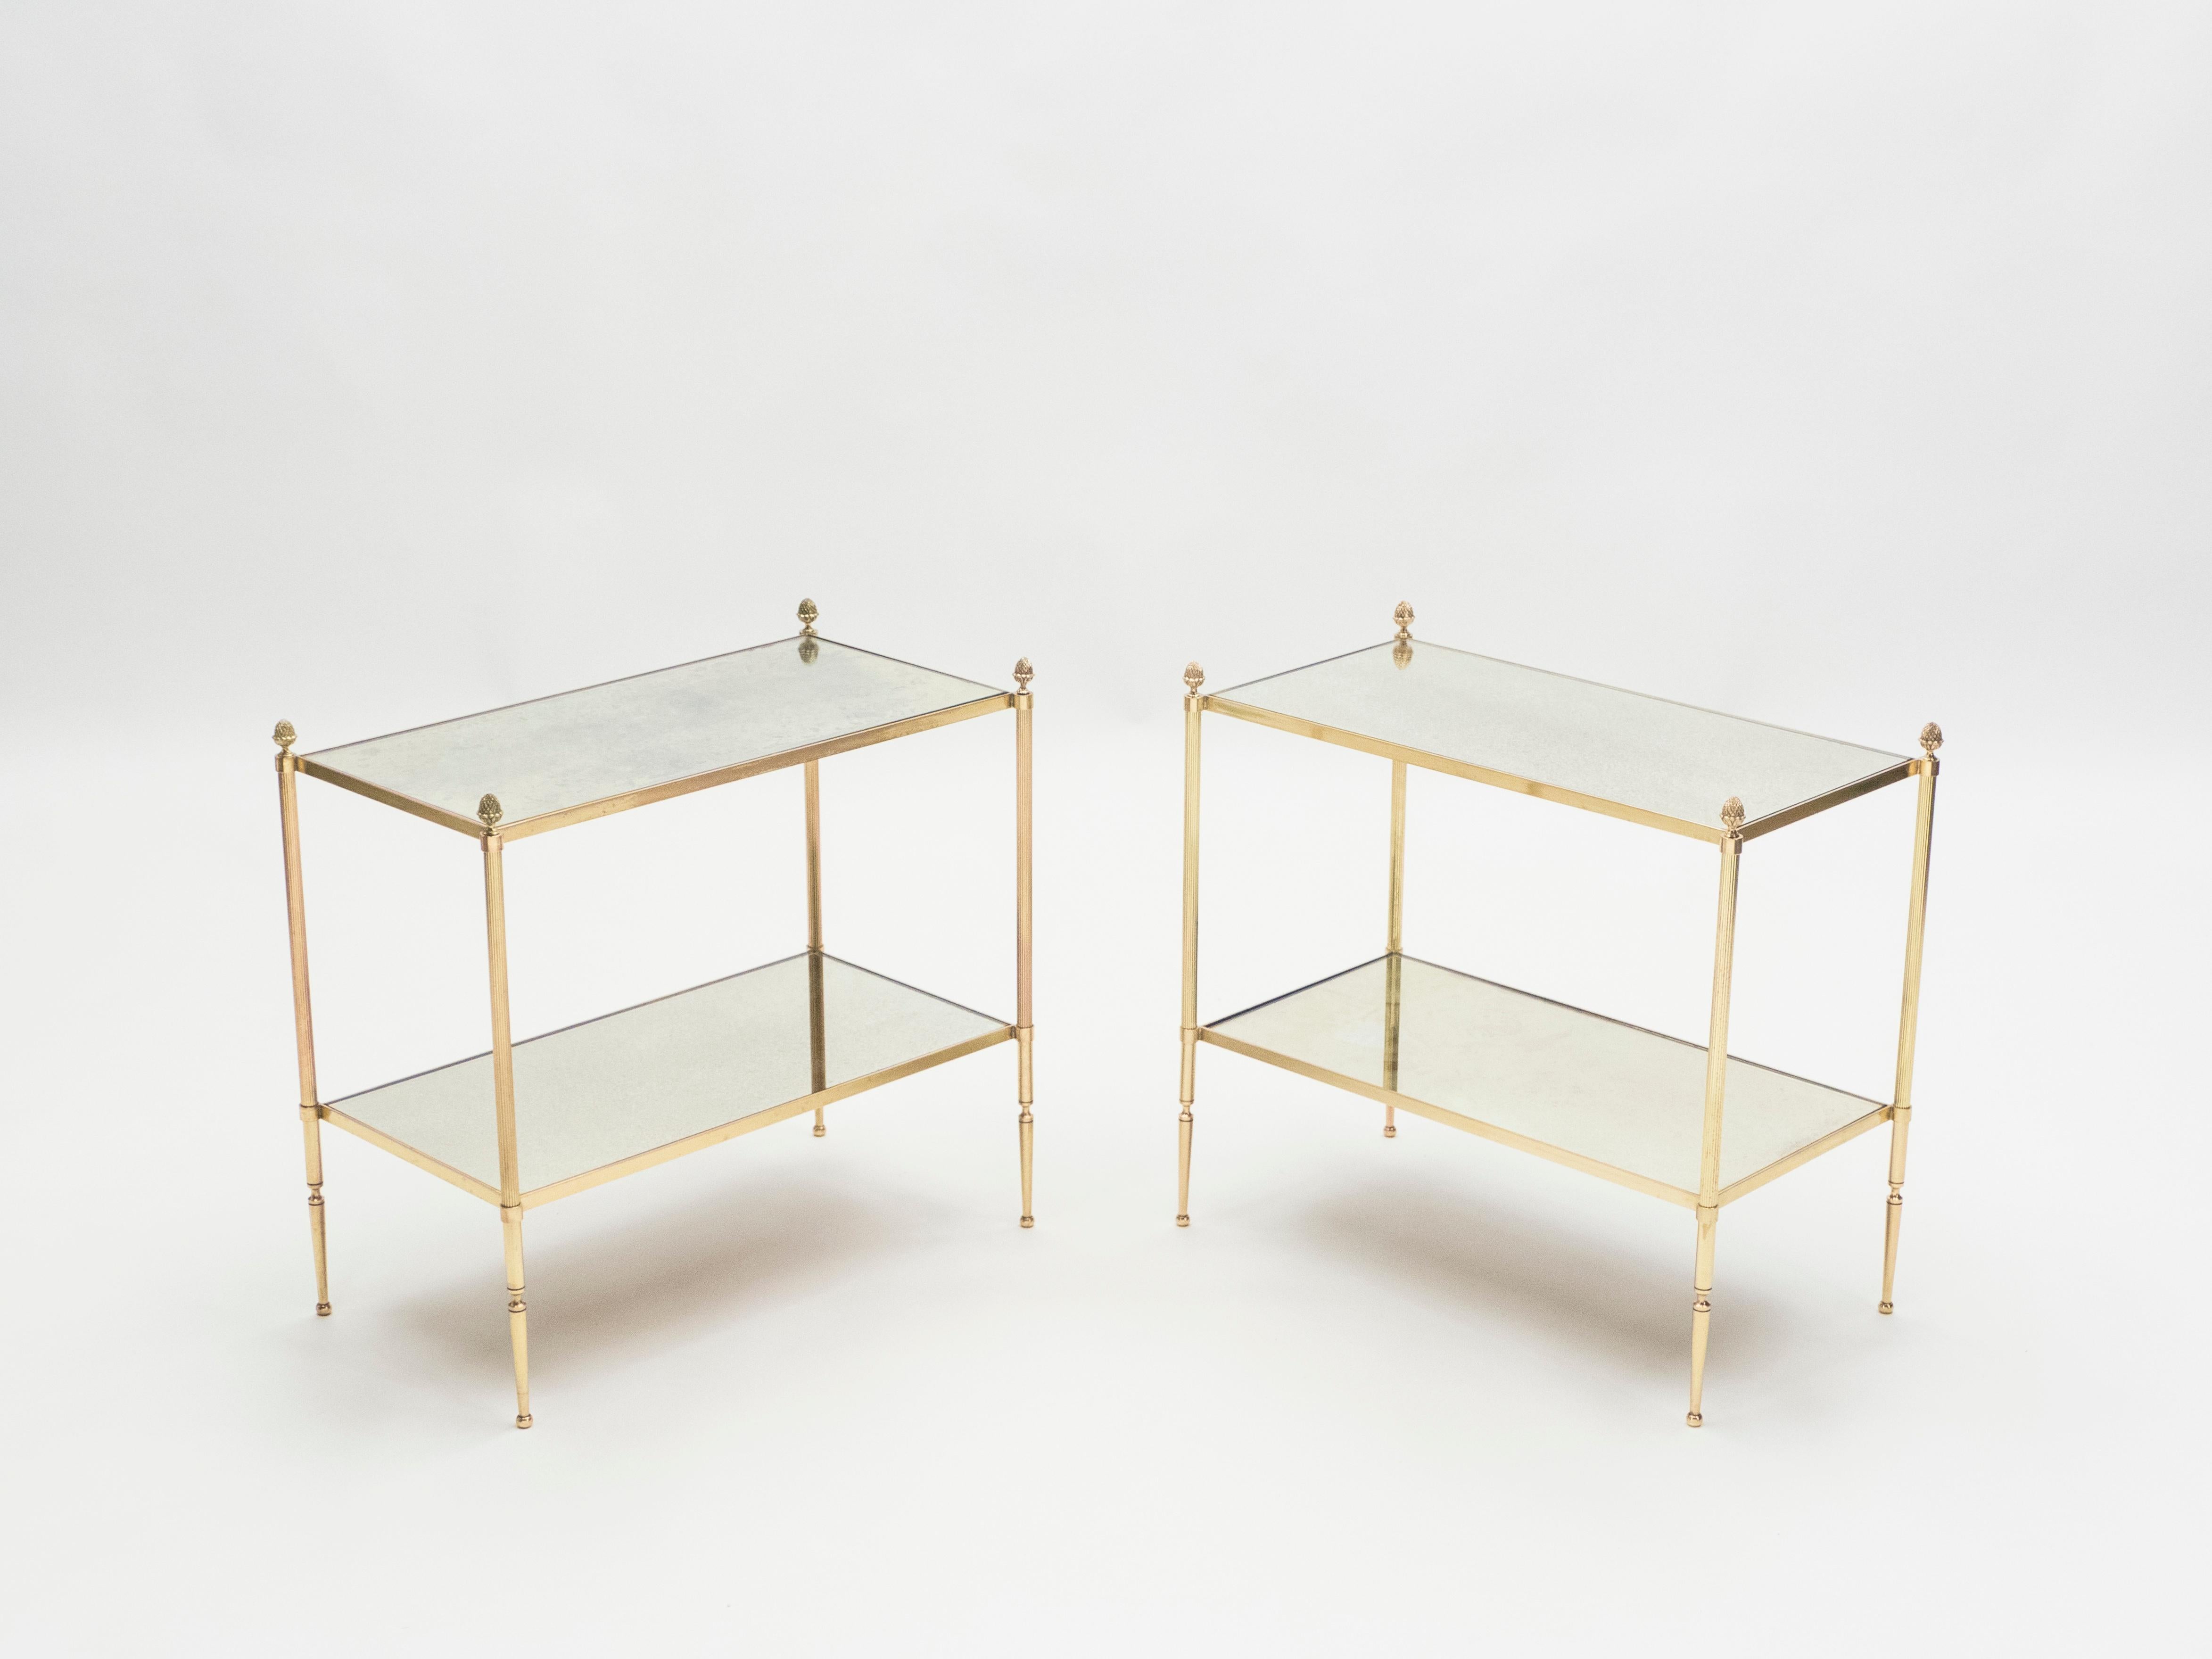 This pair of two-tier end tables by French design house Maison Baguès was created with solid brass, typical French neoclassical pine cone, and beautiful old patina mirror, circa 1950. The two-tier mirrors are timeless and smooth, while the brass